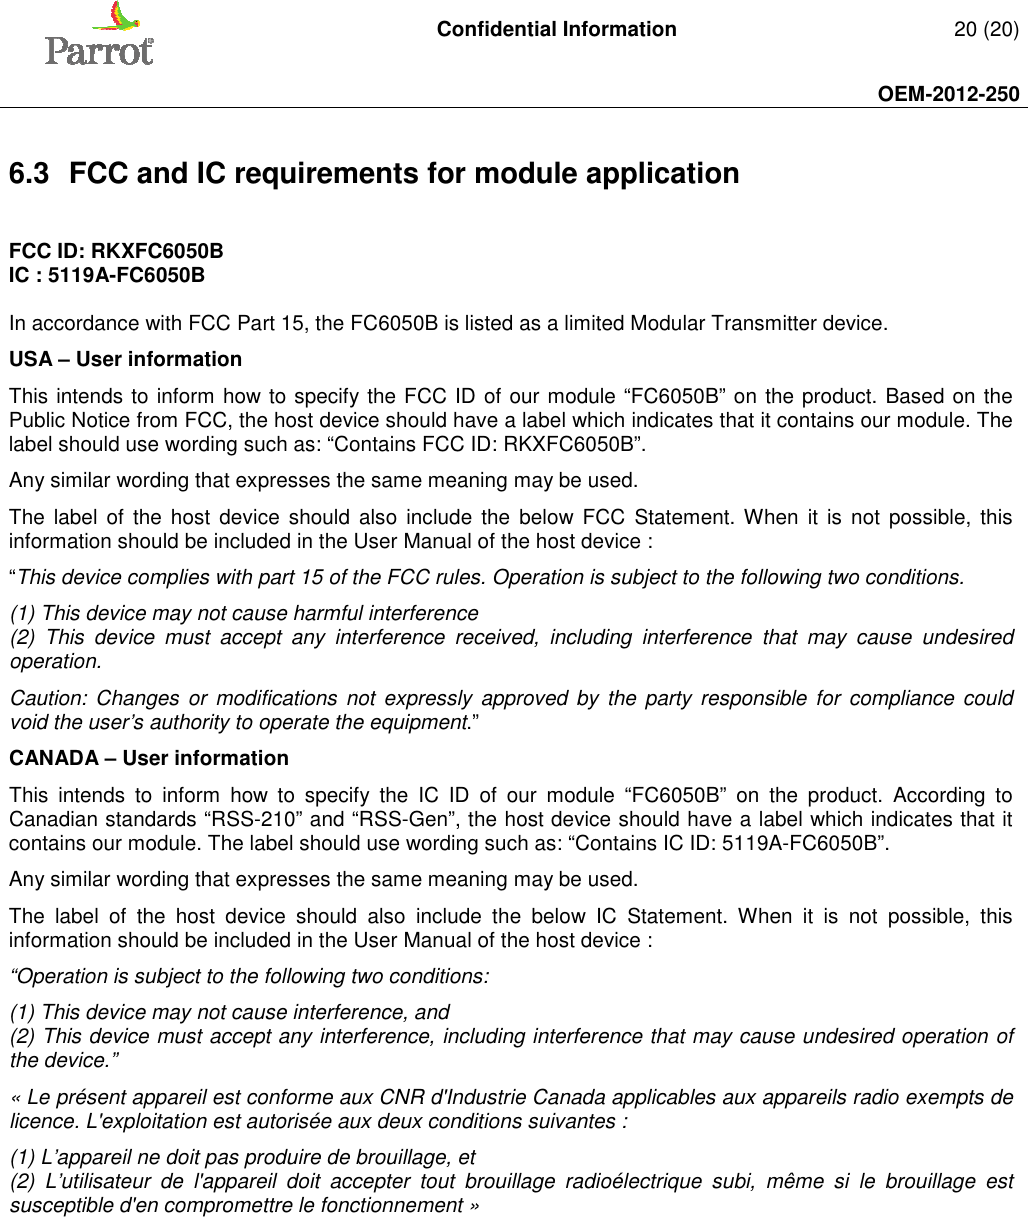   Confidential Information   20 (20)     OEM-2012-250    6.3  FCC and IC requirements for module application  FCC ID: RKXFC6050B IC : 5119A-FC6050B  In accordance with FCC Part 15, the FC6050B is listed as a limited Modular Transmitter device. USA – User information This intends to inform how to specify the FCC ID of our module “FC6050B” on the product. Based on the Public Notice from FCC, the host device should have a label which indicates that it contains our module. The label should use wording such as: “Contains FCC ID: RKXFC6050B”. Any similar wording that expresses the same meaning may be used. The  label of the  host  device  should also  include  the  below  FCC  Statement. When  it  is not  possible,  this information should be included in the User Manual of the host device : “This device complies with part 15 of the FCC rules. Operation is subject to the following two conditions. (1) This device may not cause harmful interference (2)  This  device  must  accept  any  interference  received,  including  interference  that  may  cause  undesired operation. Caution: Changes  or  modifications  not  expressly  approved  by  the party  responsible  for  compliance  could void the user’s authority to operate the equipment.” CANADA – User information This  intends  to  inform  how  to  specify  the  IC  ID  of  our  module  “FC6050B”  on  the  product.  According  to Canadian standards “RSS-210” and “RSS-Gen”, the host device should have a label which indicates that it contains our module. The label should use wording such as: “Contains IC ID: 5119A-FC6050B”. Any similar wording that expresses the same meaning may be used. The  label  of  the  host  device  should  also  include  the  below  IC  Statement.  When  it  is  not  possible,  this information should be included in the User Manual of the host device : “Operation is subject to the following two conditions: (1) This device may not cause interference, and (2) This device must accept any interference, including interference that may cause undesired operation of the device.” « Le présent appareil est conforme aux CNR d&apos;Industrie Canada applicables aux appareils radio exempts de licence. L&apos;exploitation est autorisée aux deux conditions suivantes :  (1) L’appareil ne doit pas produire de brouillage, et  (2)  L’utilisateur  de  l&apos;appareil  doit  accepter  tout  brouillage  radioélectrique  subi,  même  si  le  brouillage  est susceptible d&apos;en compromettre le fonctionnement »      